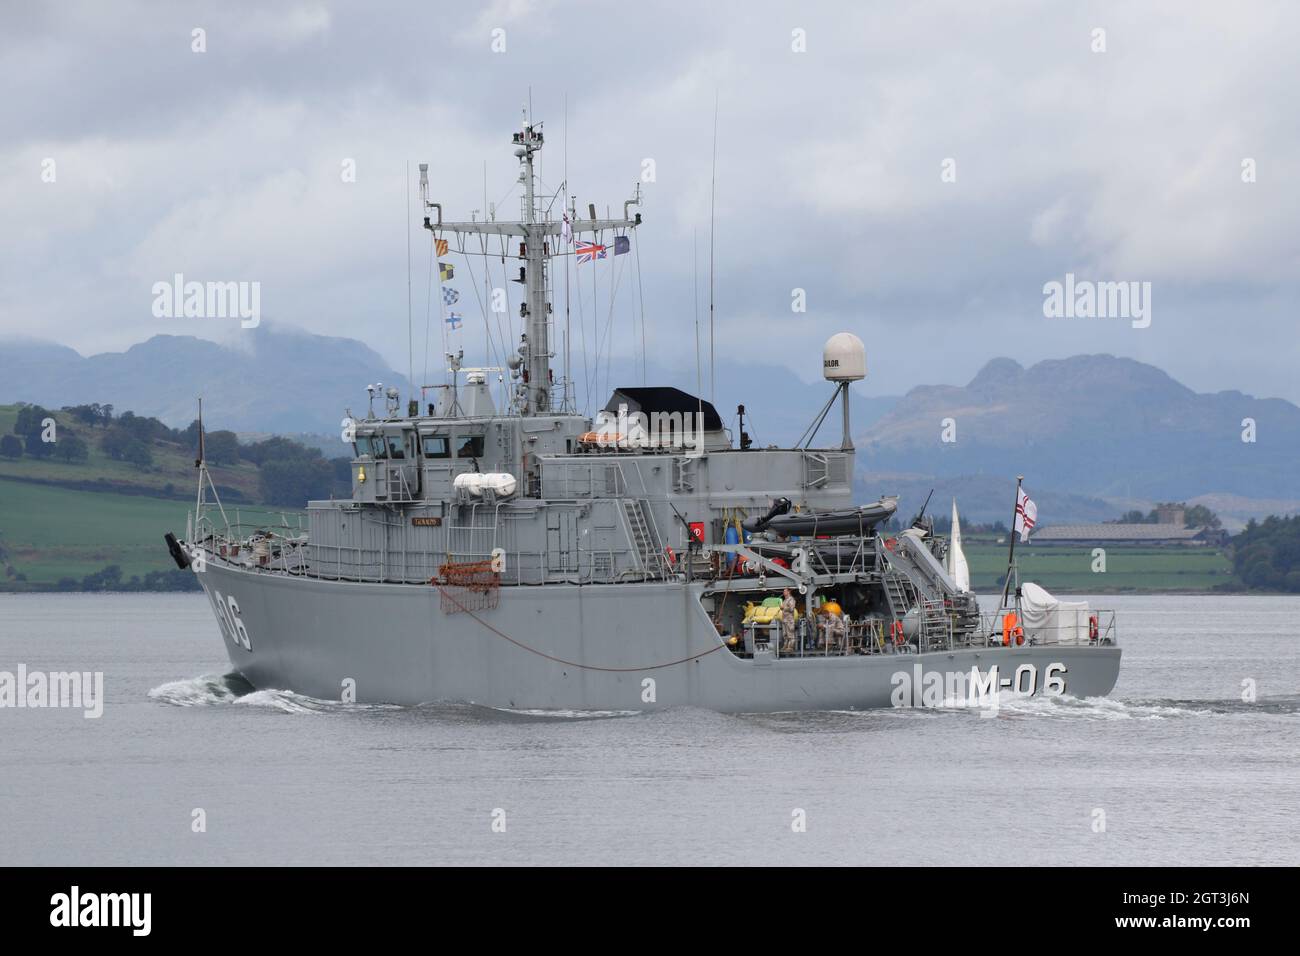 LVNS Talivaldis (M-06), an Alkmaar-class (Tripartite) minehunter operated by the Latvian Navy, passing Greenock on the Firth of Clyde, as she heads out to take part in the military exercises Dynamic Mariner 2021 and Joint Warrior 21-2. This vessel once served in the Royal Netherlands Navy before being decommissioned and sold to Latvia. Stock Photo